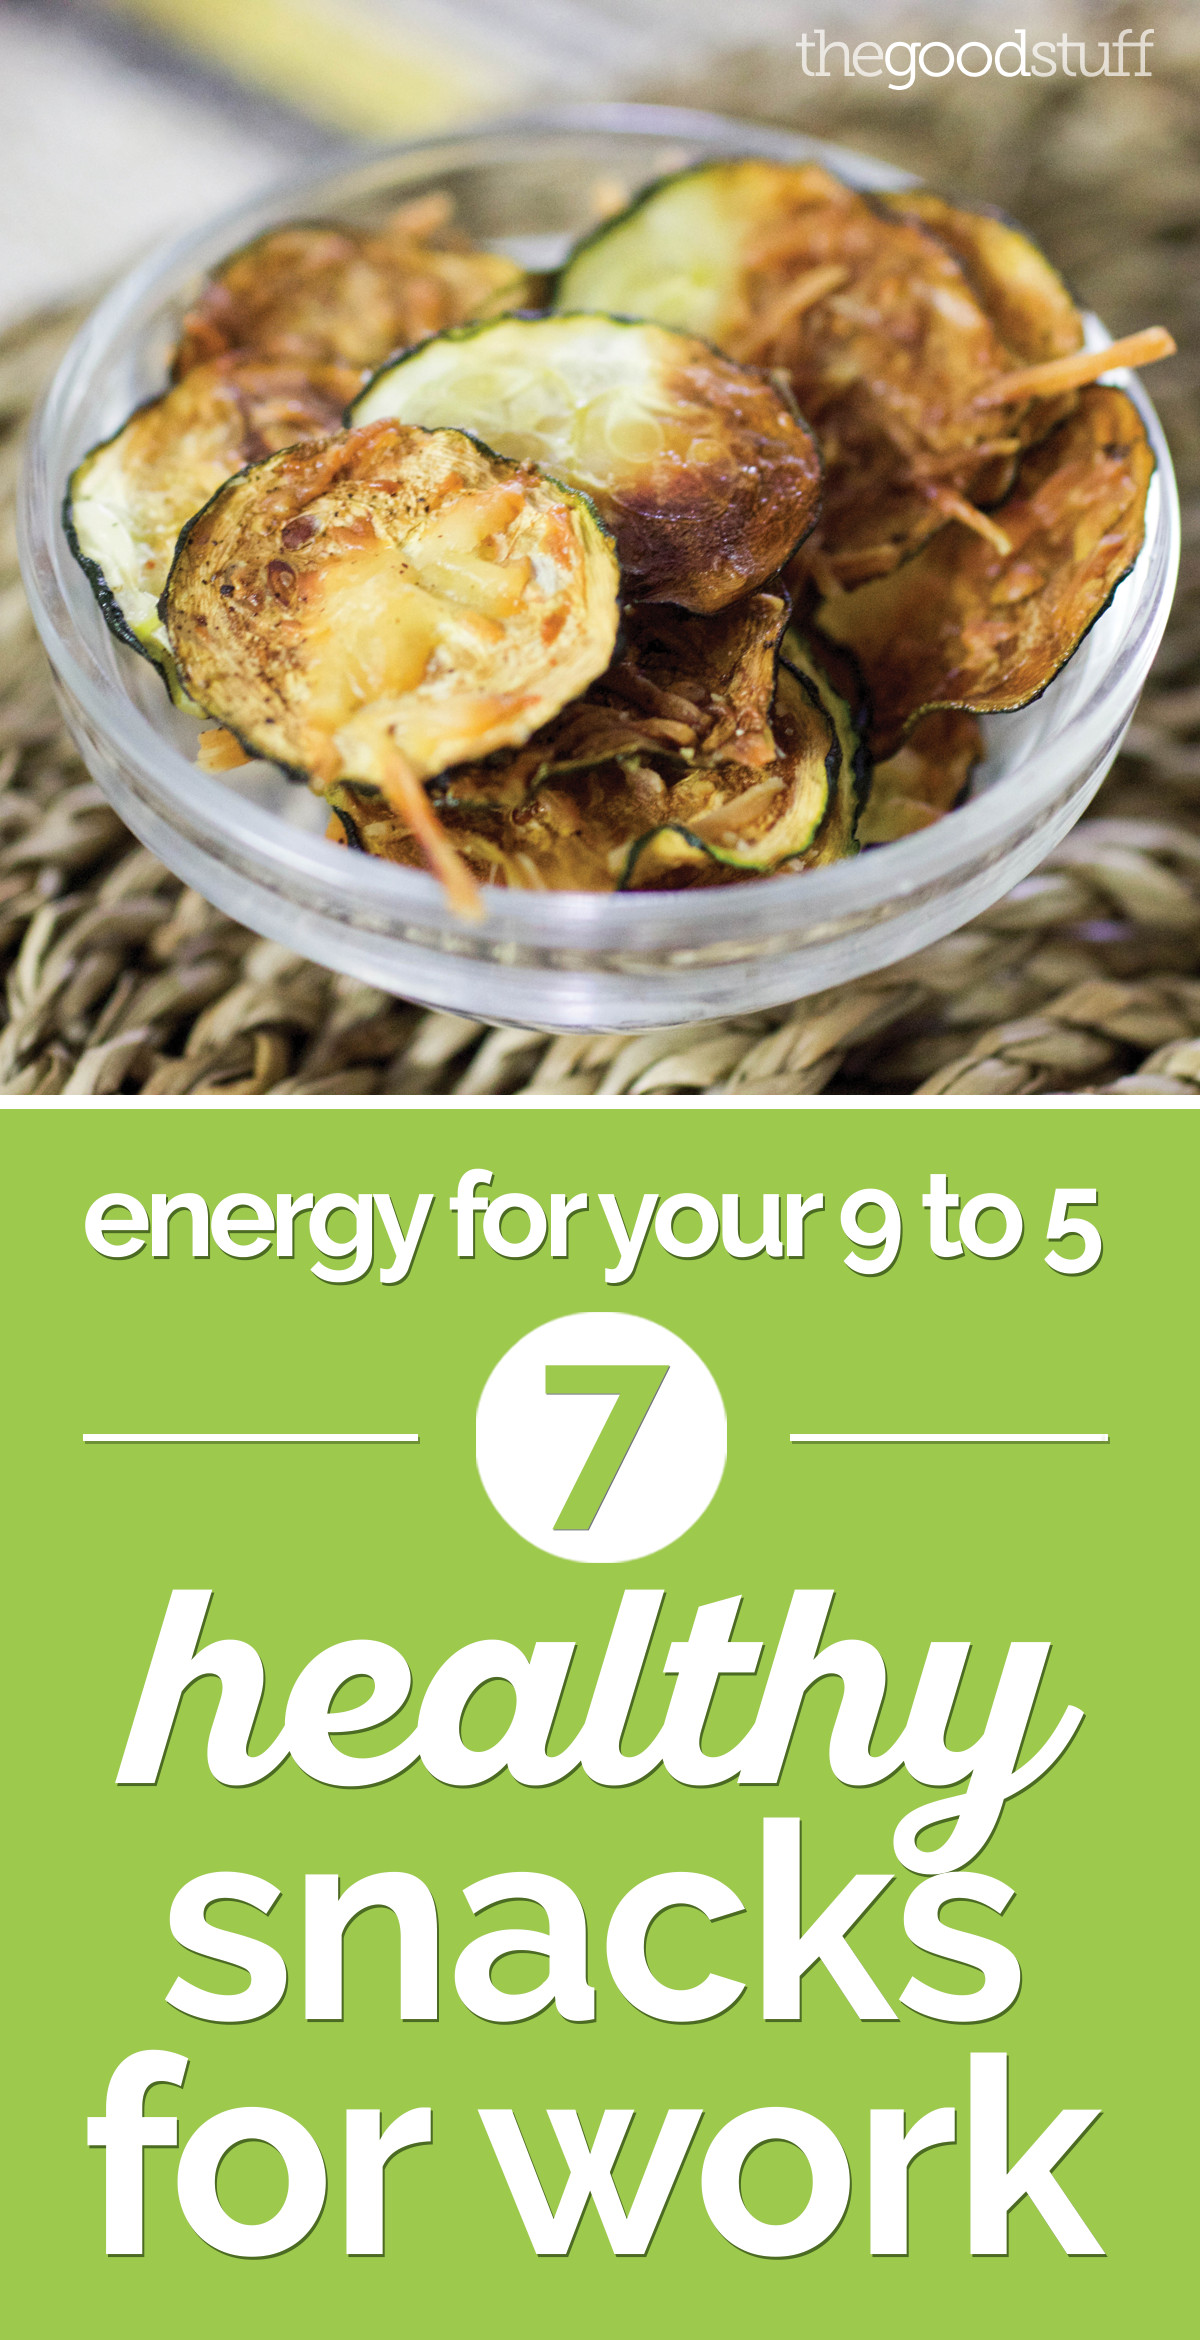 Best Healthy Snacks For Work
 Energy for Your 9 to 5 10 Healthy Snacks for Work